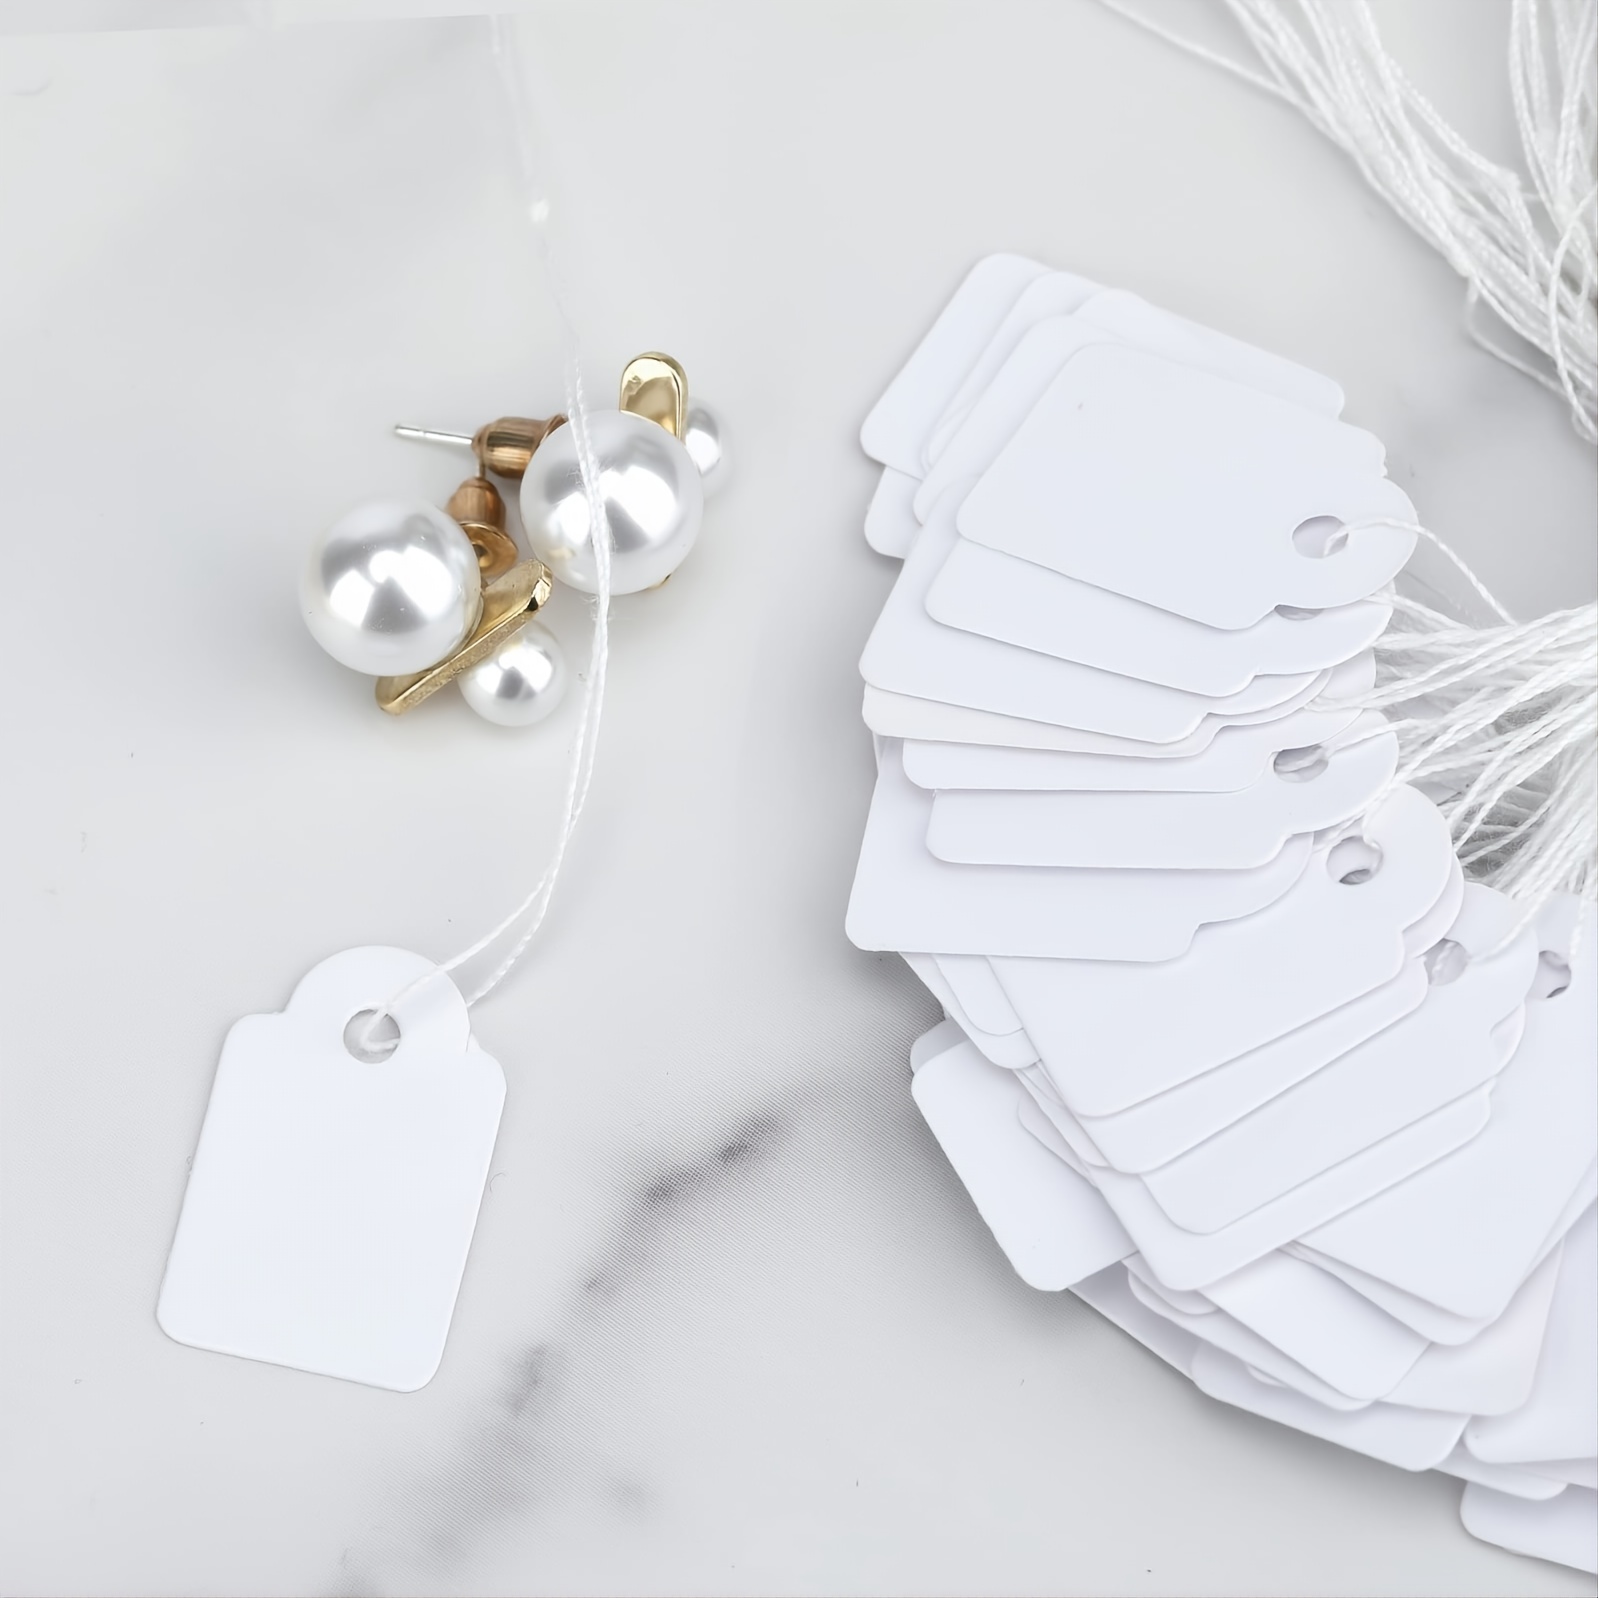 Tags With Strings Attached 500Pcs Trinkets Tags With String